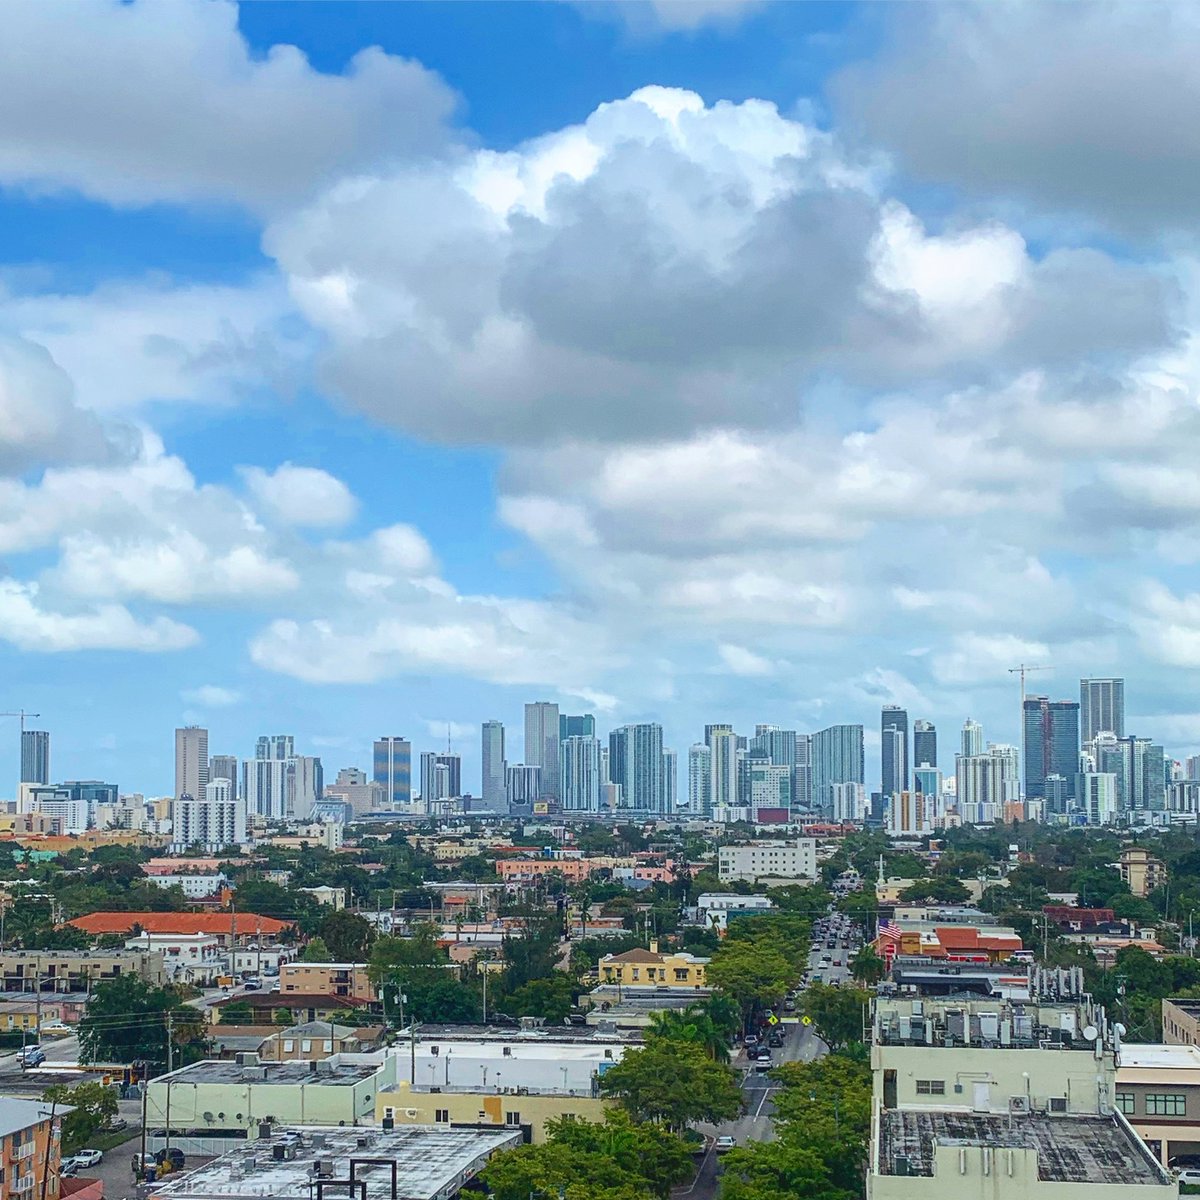 Lovely panorama view of #brickell and #downtownmiami from the famous local neighborhood of #littlehavana ! Vibrant neighborhood full of #cubanculture and #latinculture. Home of #calleocho #maximogomezpark #towertheater #intownmiami and minutes away from Brickell, downtownmiami.